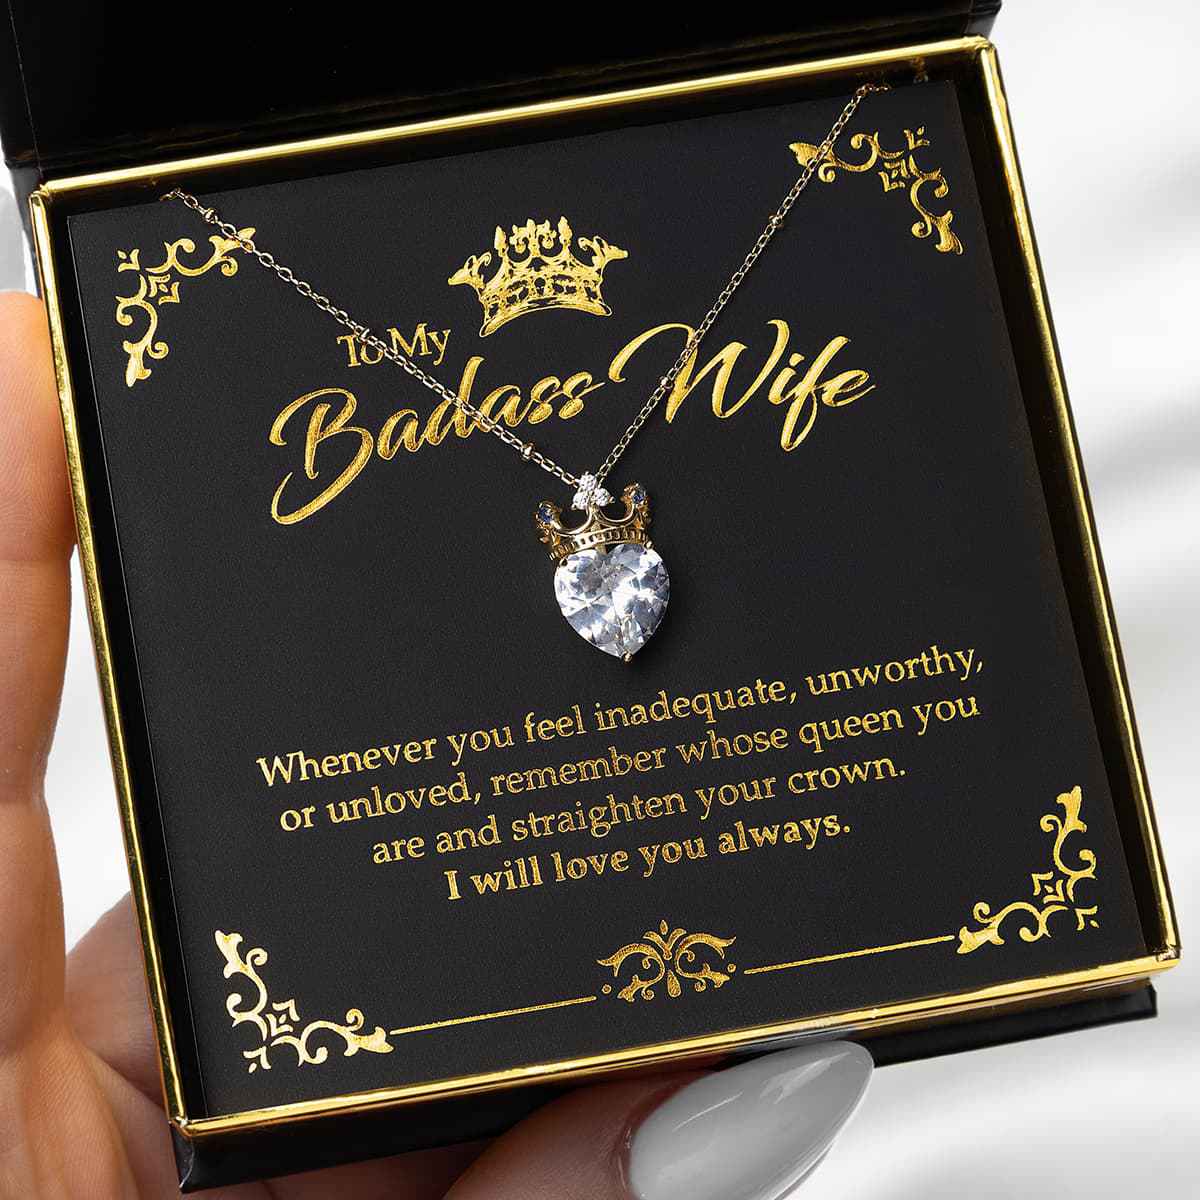 To My Badass Wife (Gold Card) - Crystal Heart Golden Crown Necklace Gift Set